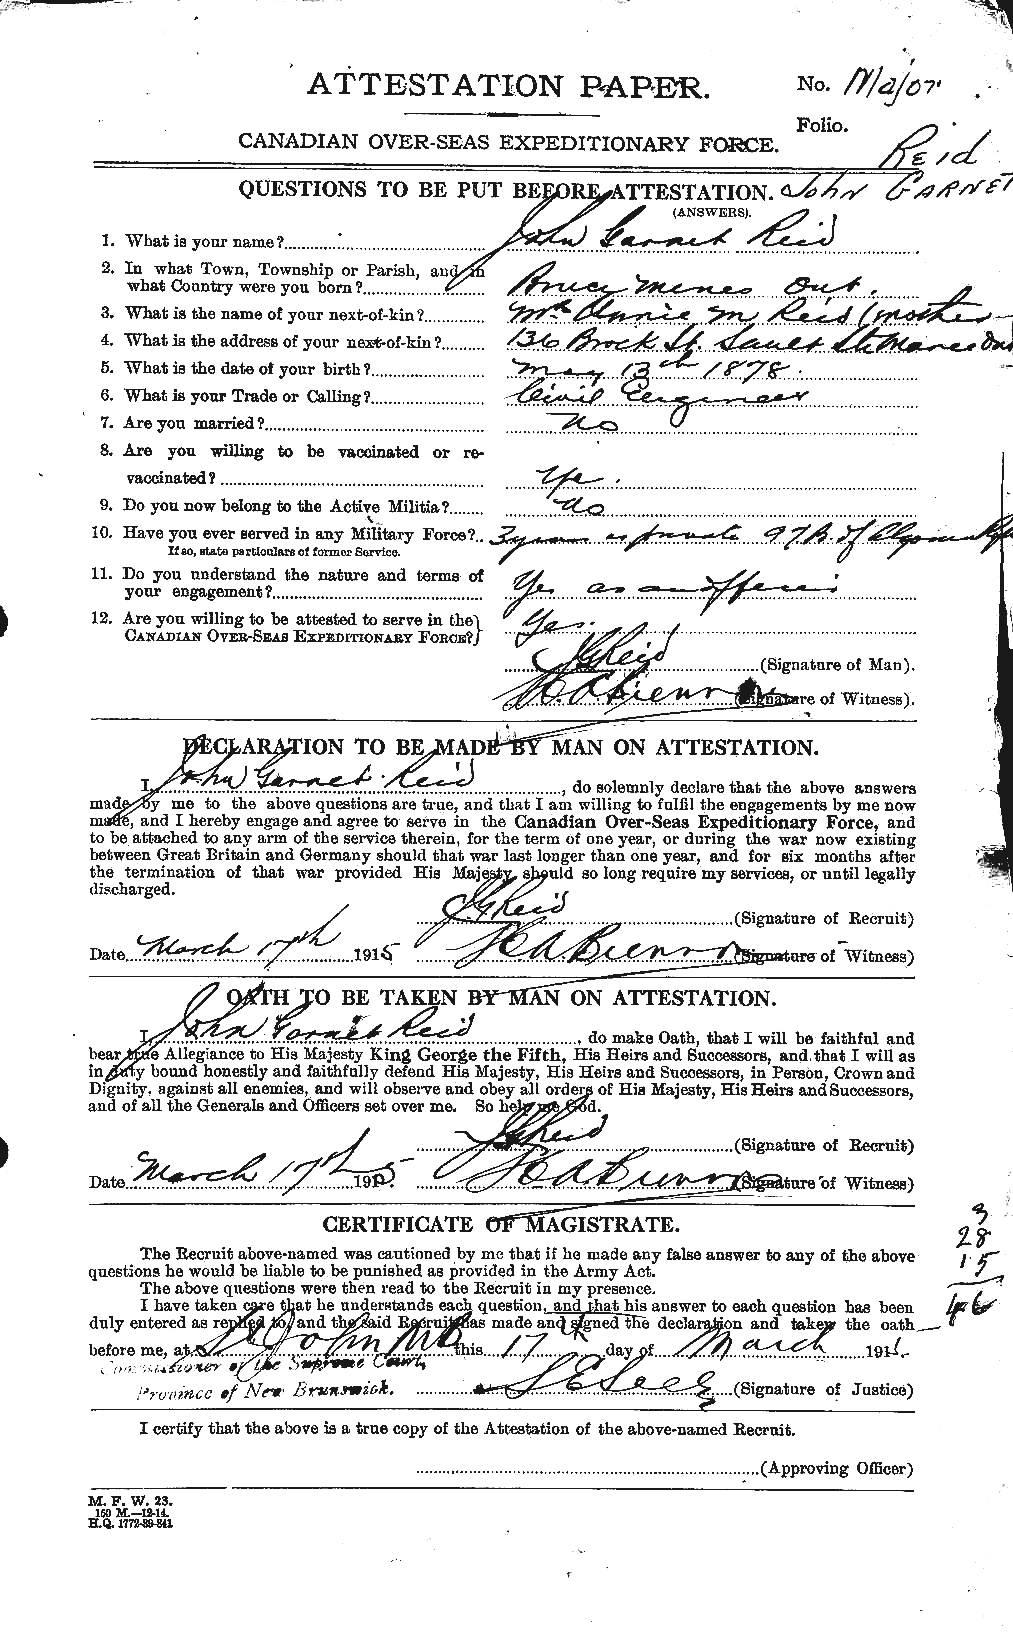 Personnel Records of the First World War - CEF 598841a